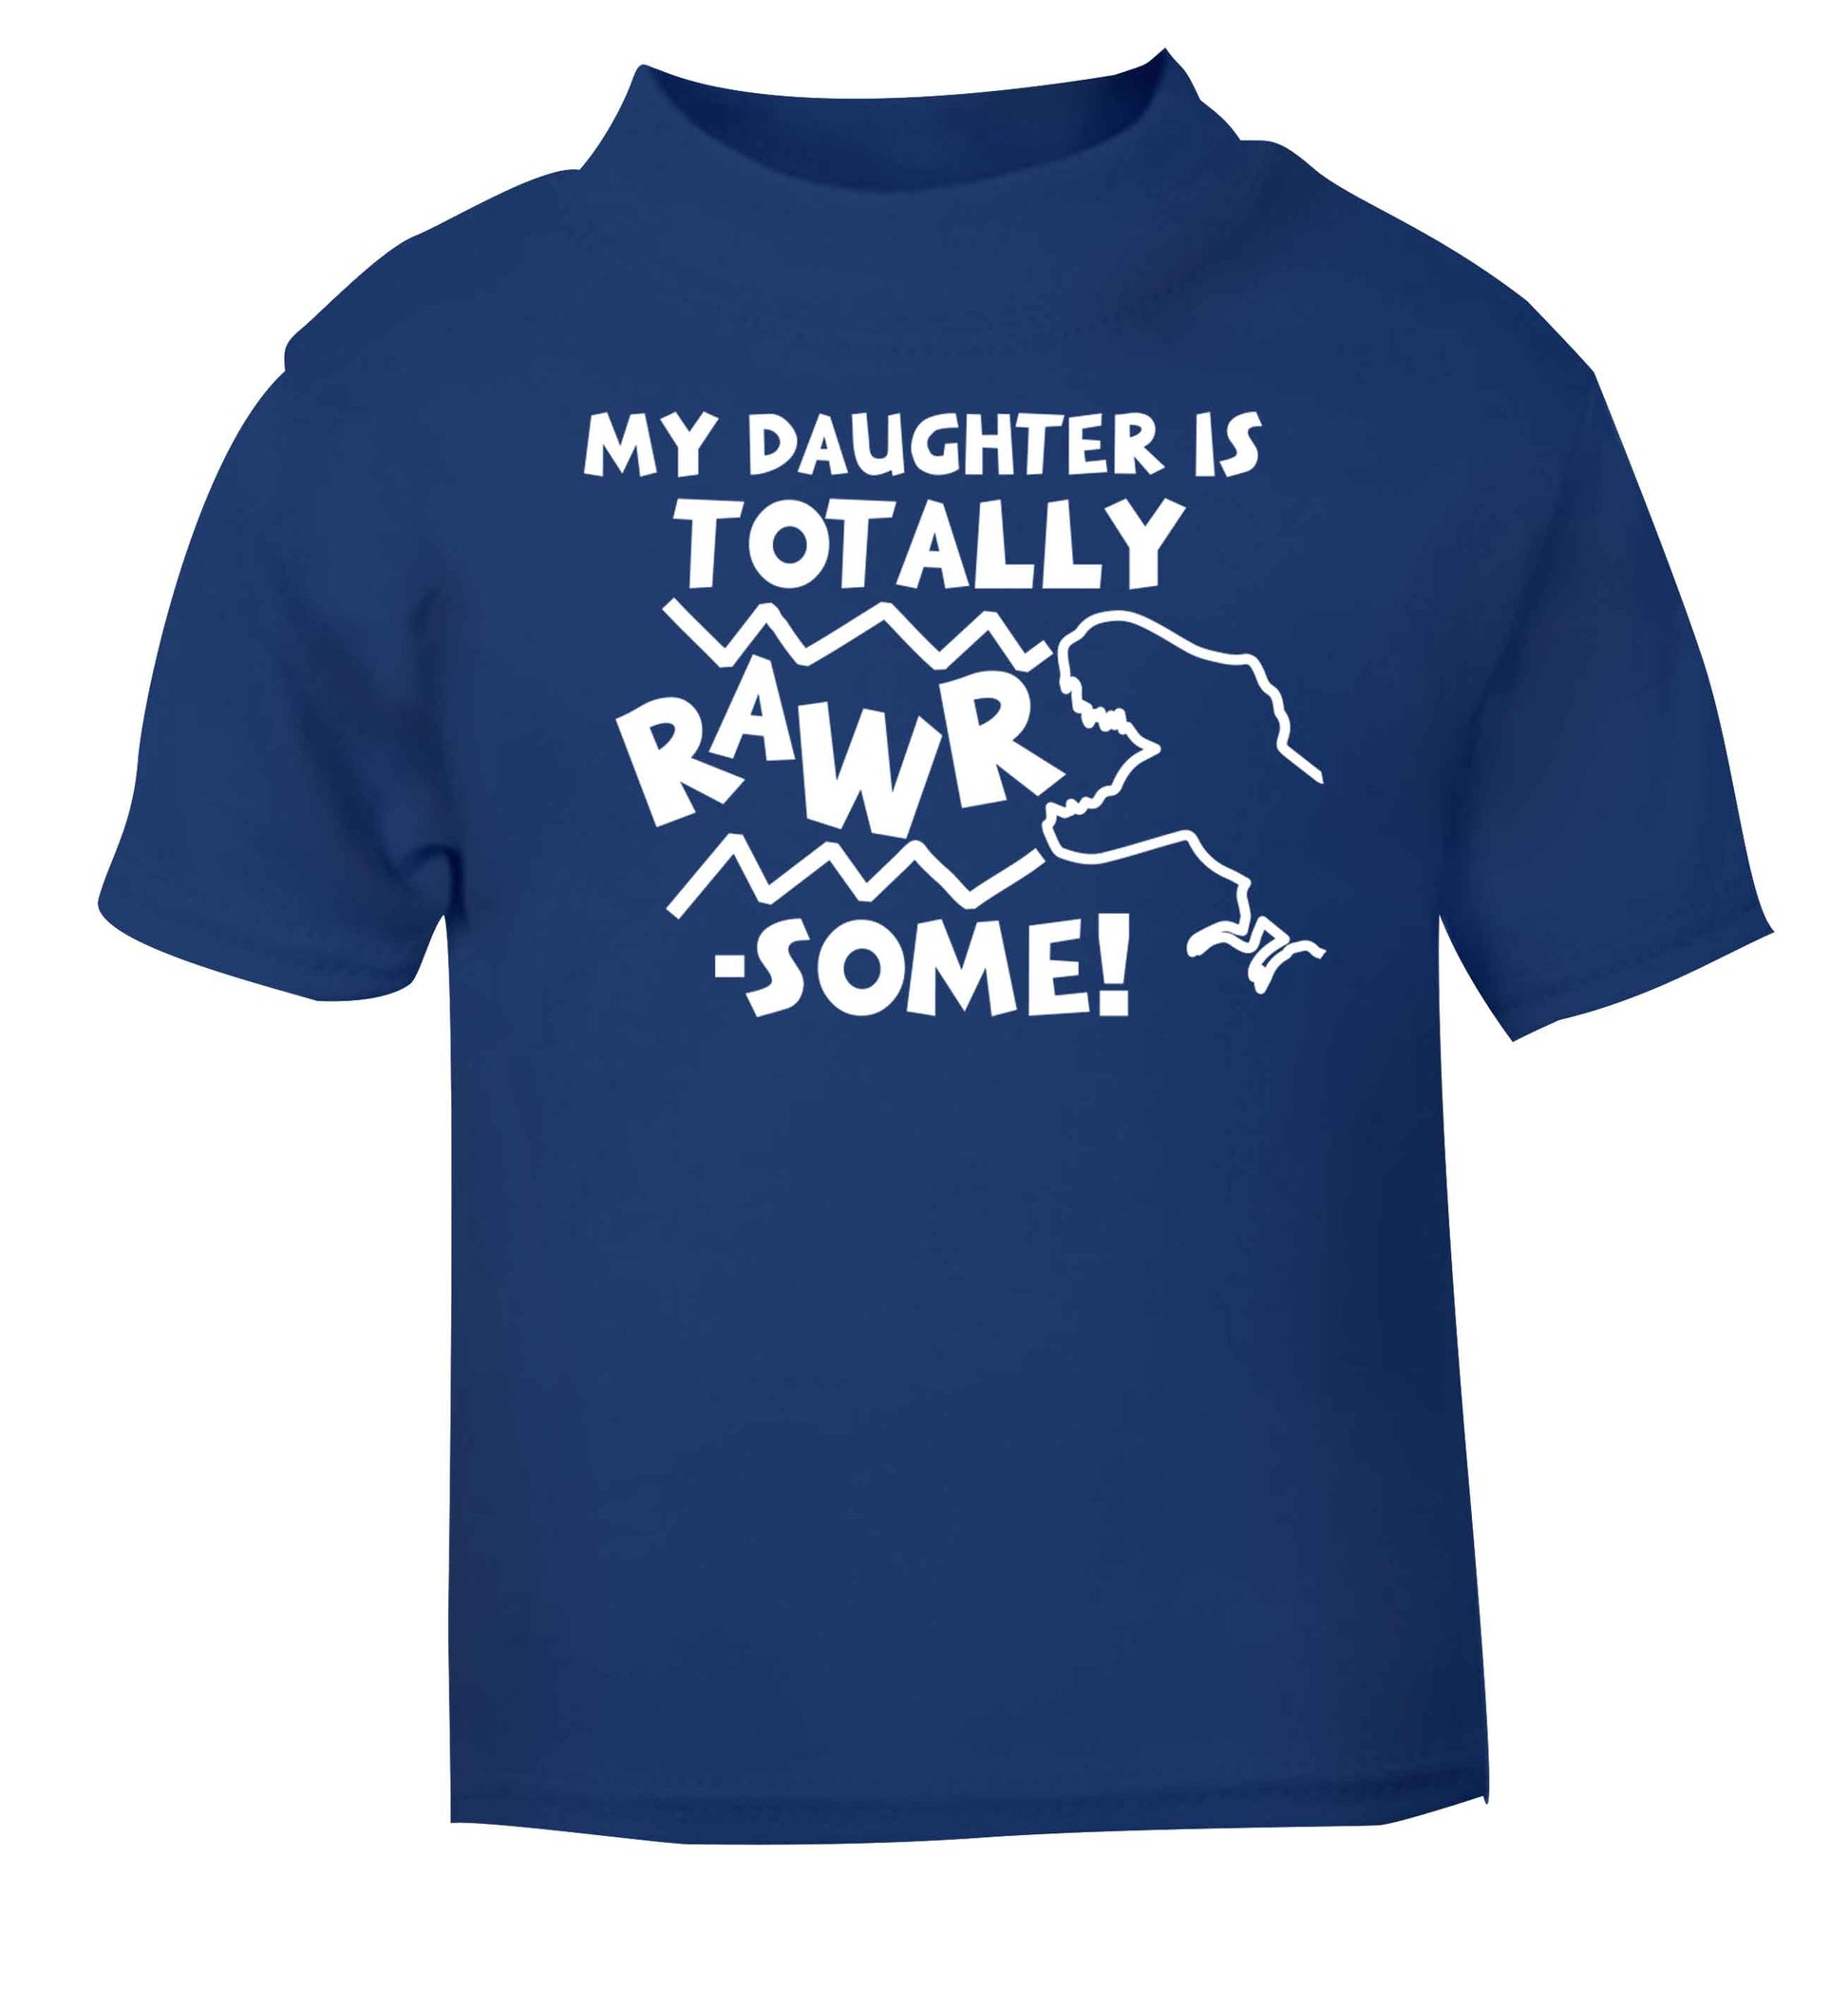 My daughter is totally rawrsome blue baby toddler Tshirt 2 Years